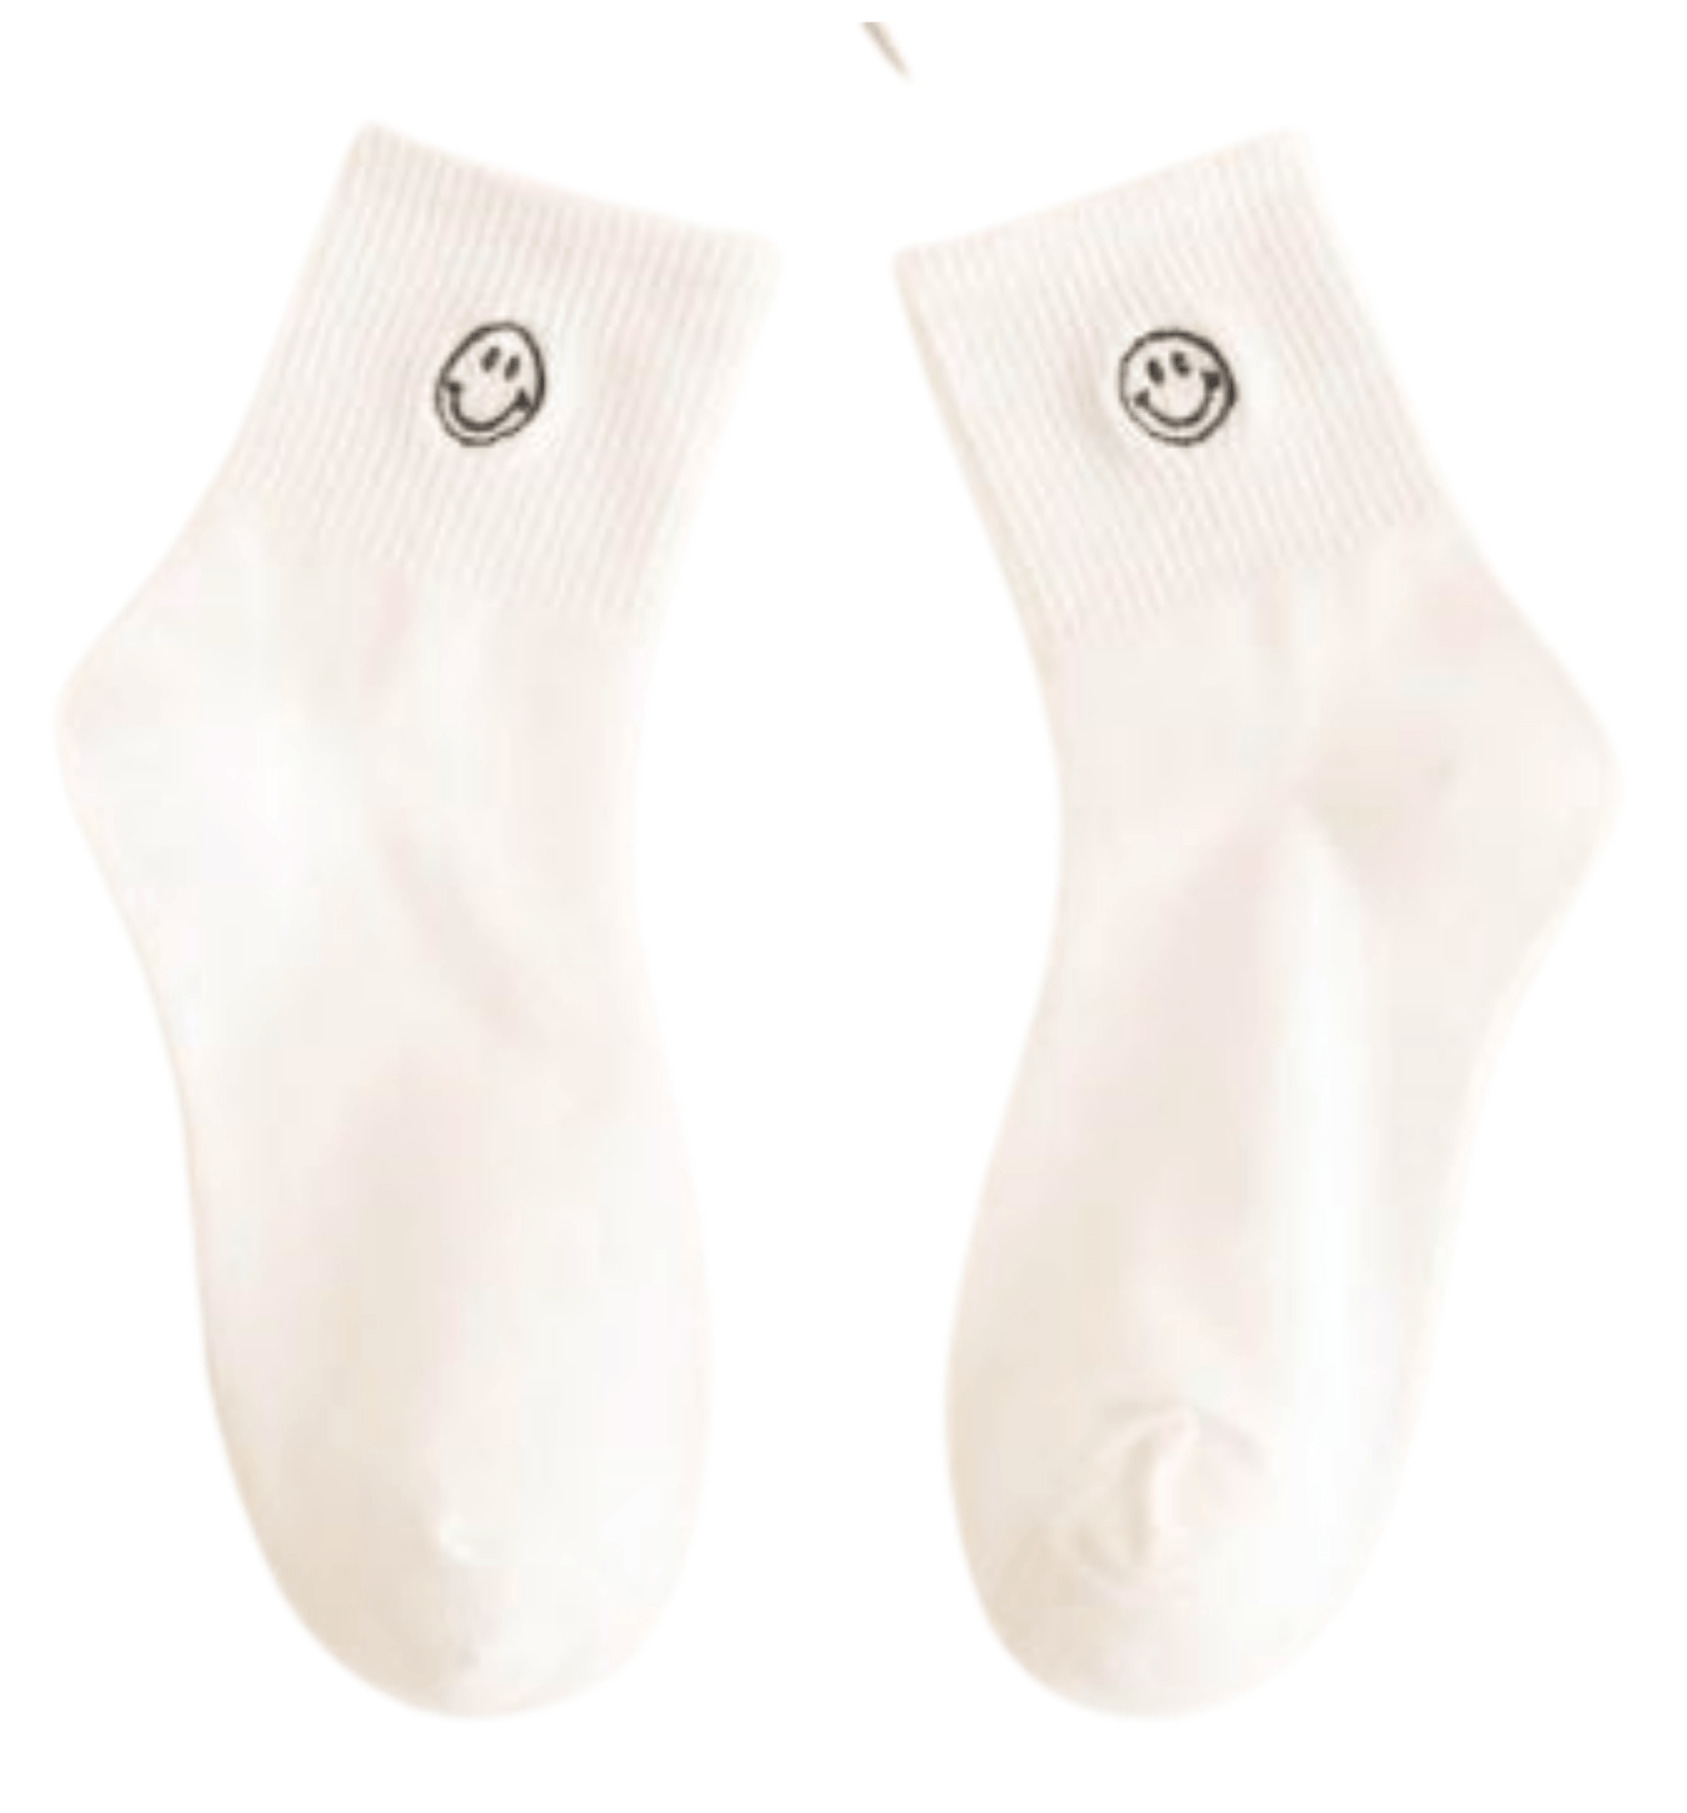 Be Happy Embroidered Smiley Face Women's Socks 1 Pair - The Kindness Cause Birthday, Encouragement, Just Because Gifts